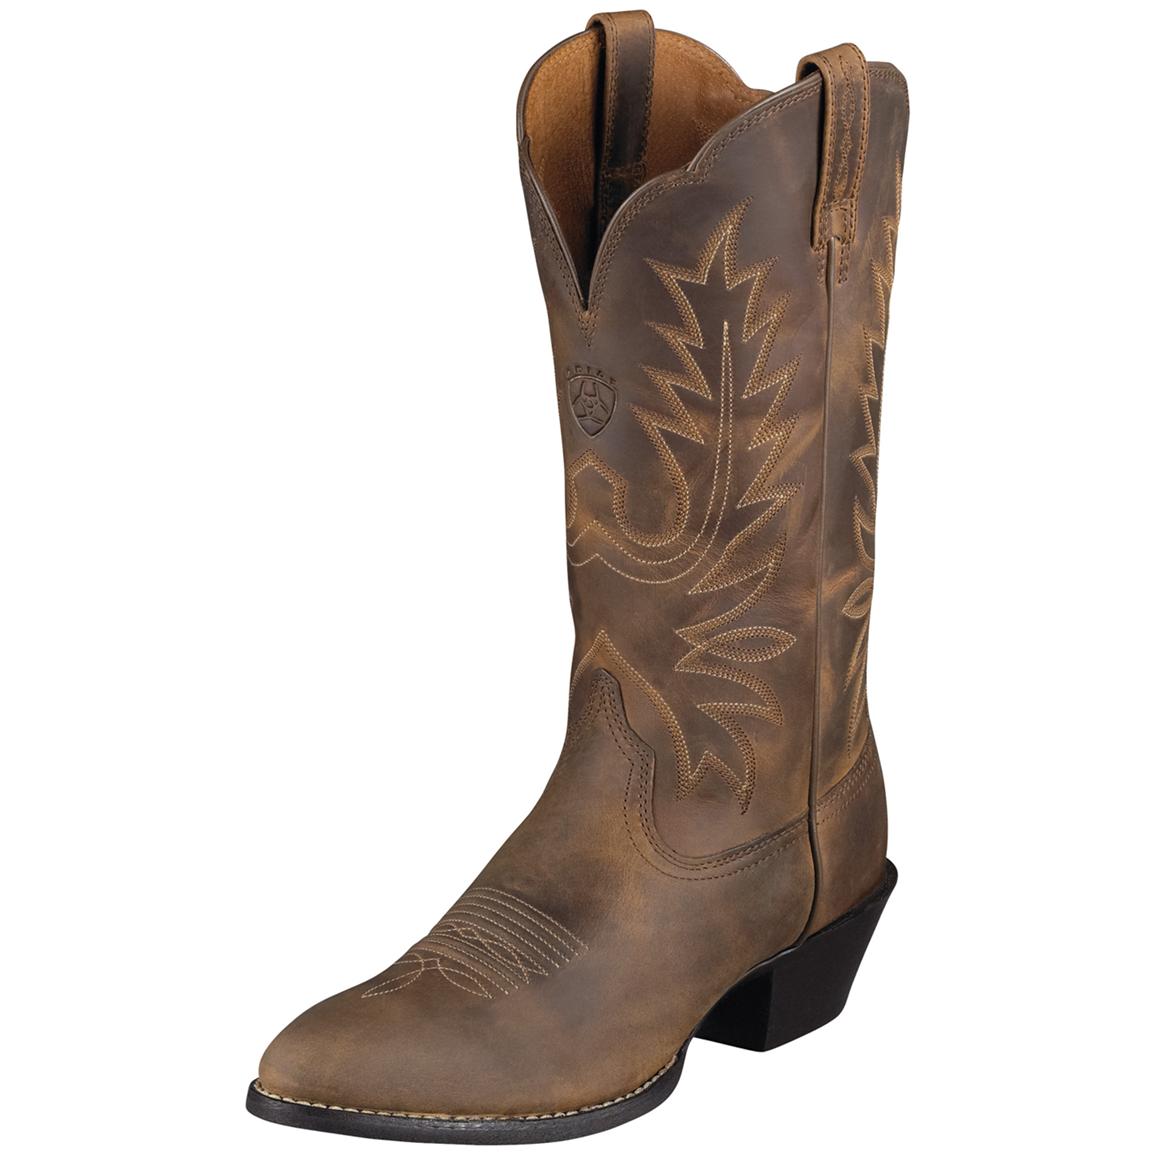 Women's Ariat 12-inch Heritage Western R-Toe Cowboy Boots